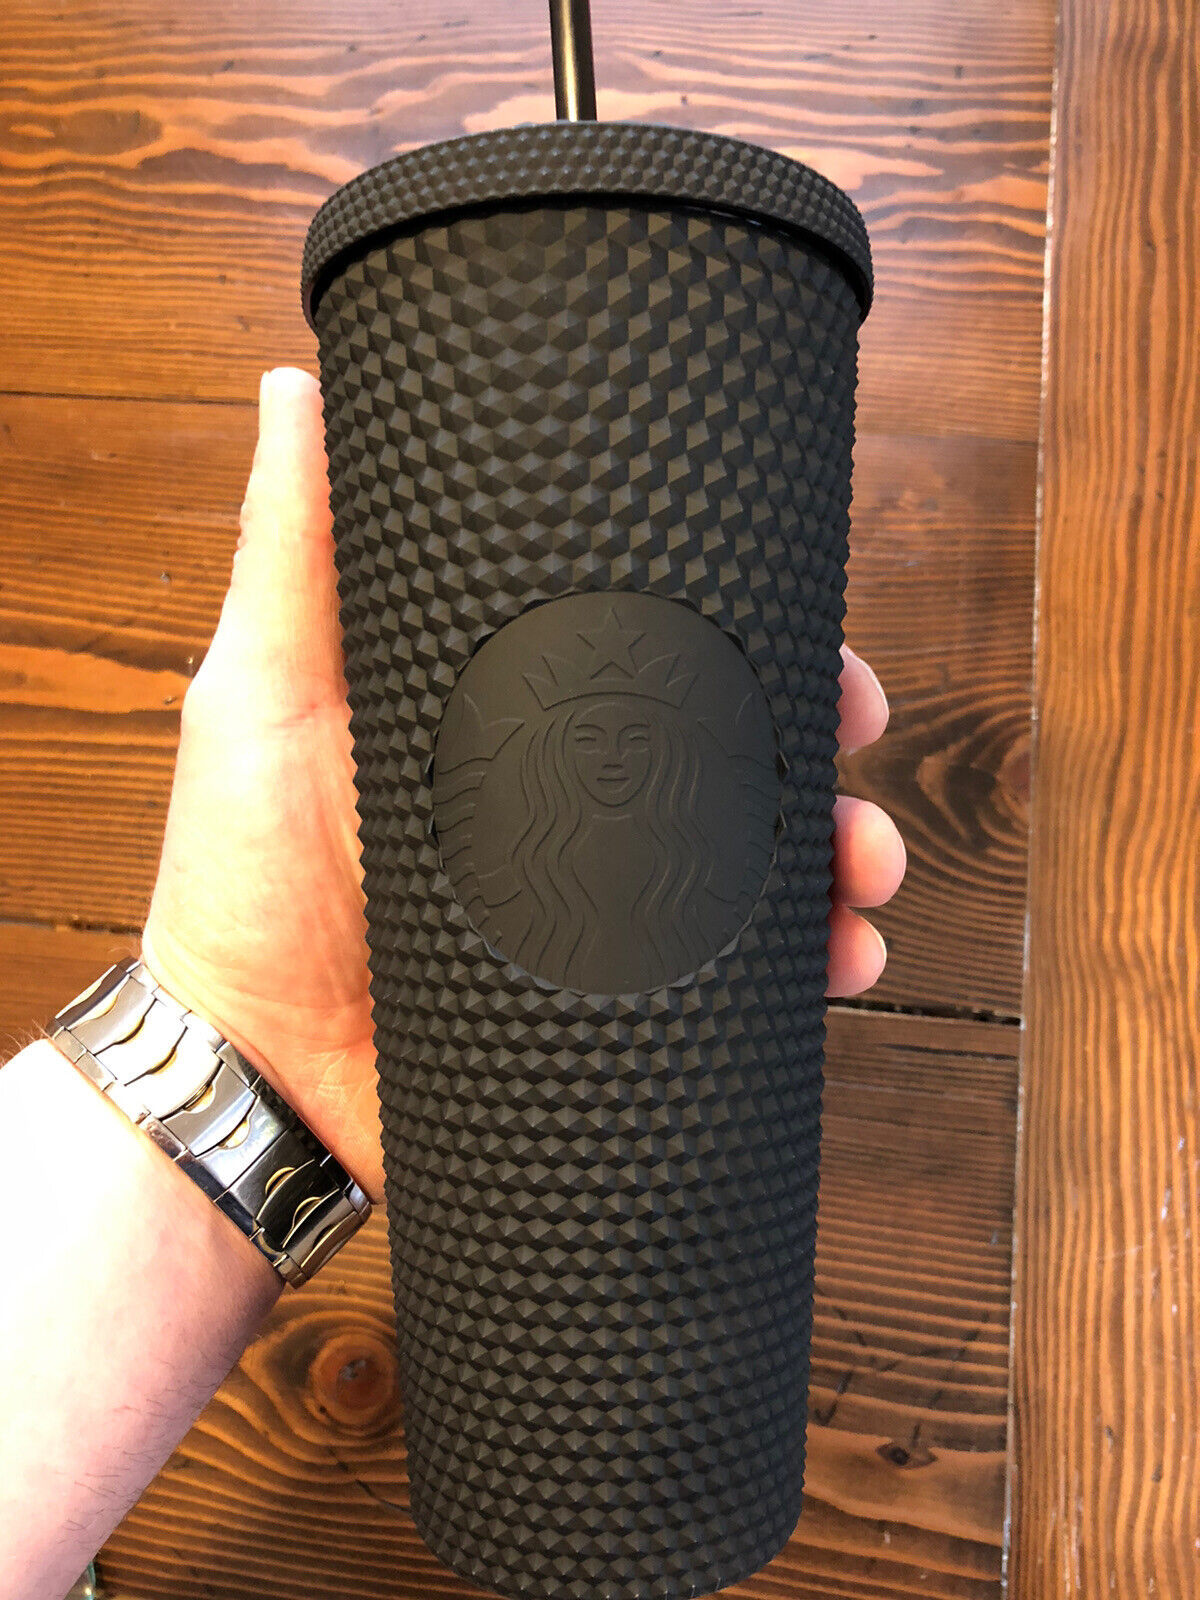 NEW Starbucks LIMITED EDITION 24 oz Matte Black Studded Tumbler Cup ONE DAY SALE